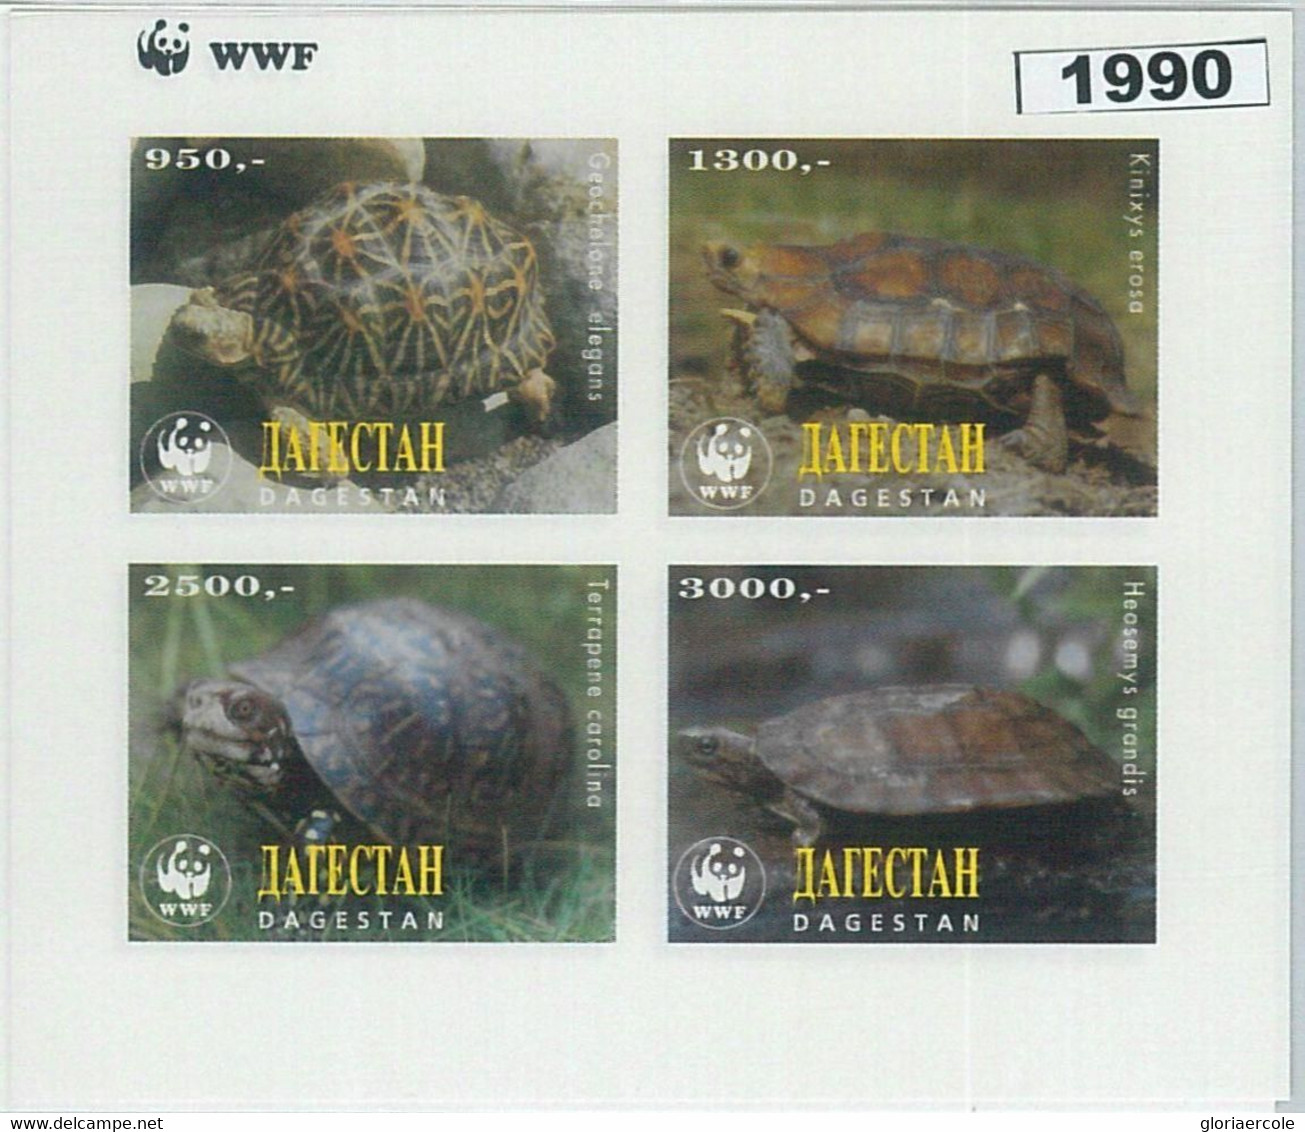 M1990 - RUSSIAN STATE, IMPERF SHEET: WWF, Turtles, Reptiles  R04.22 - Usados